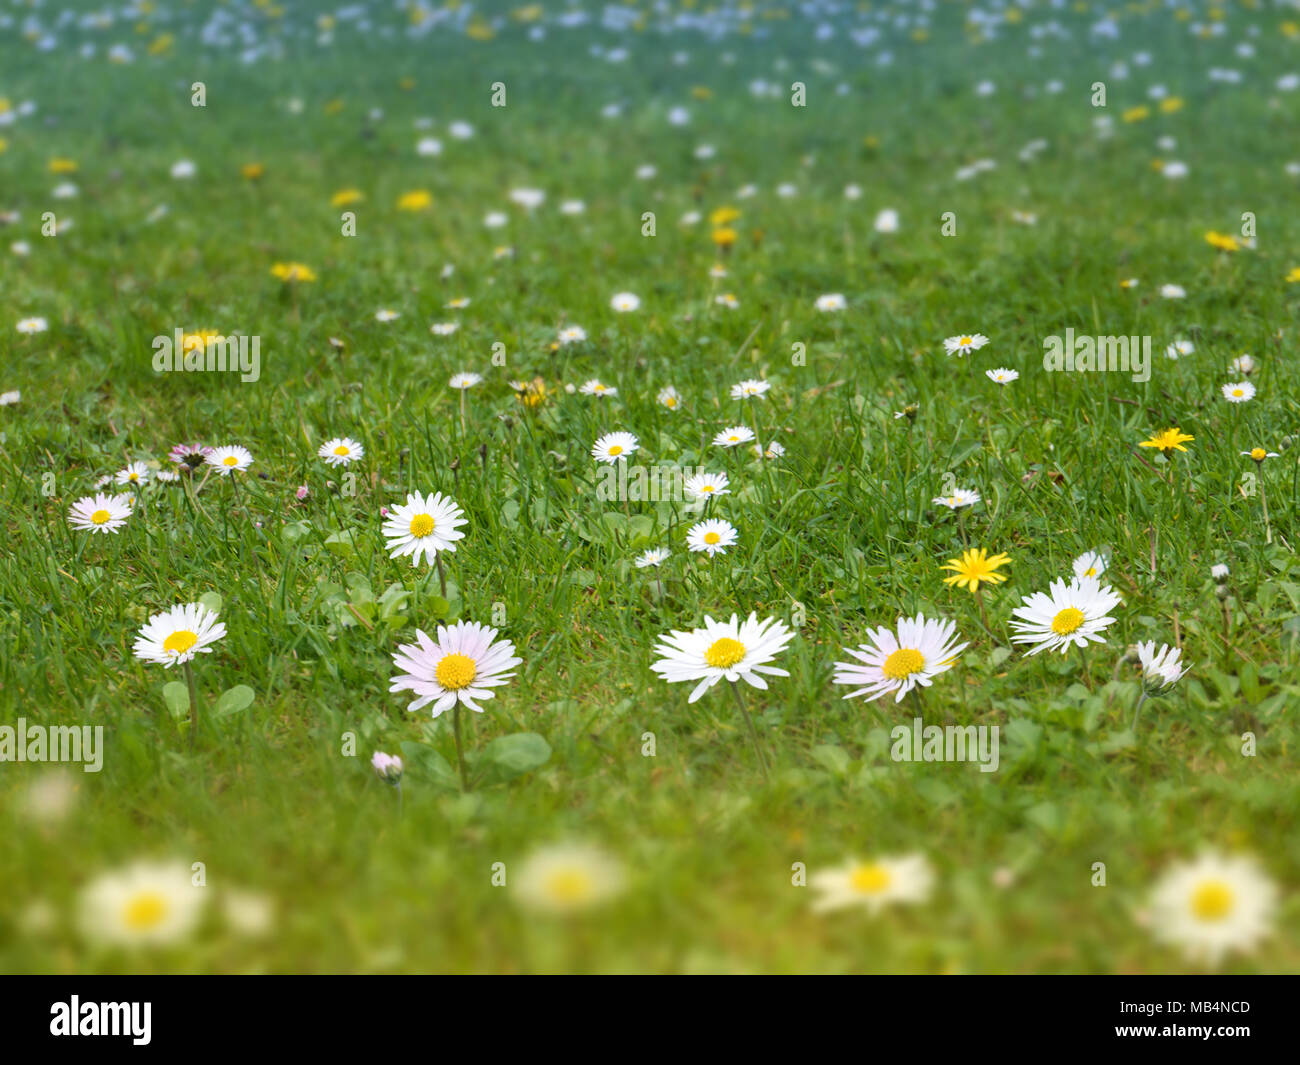 Green grass lawn with white daisy and yellow dandelion flowers spring blurred background Stock Photo